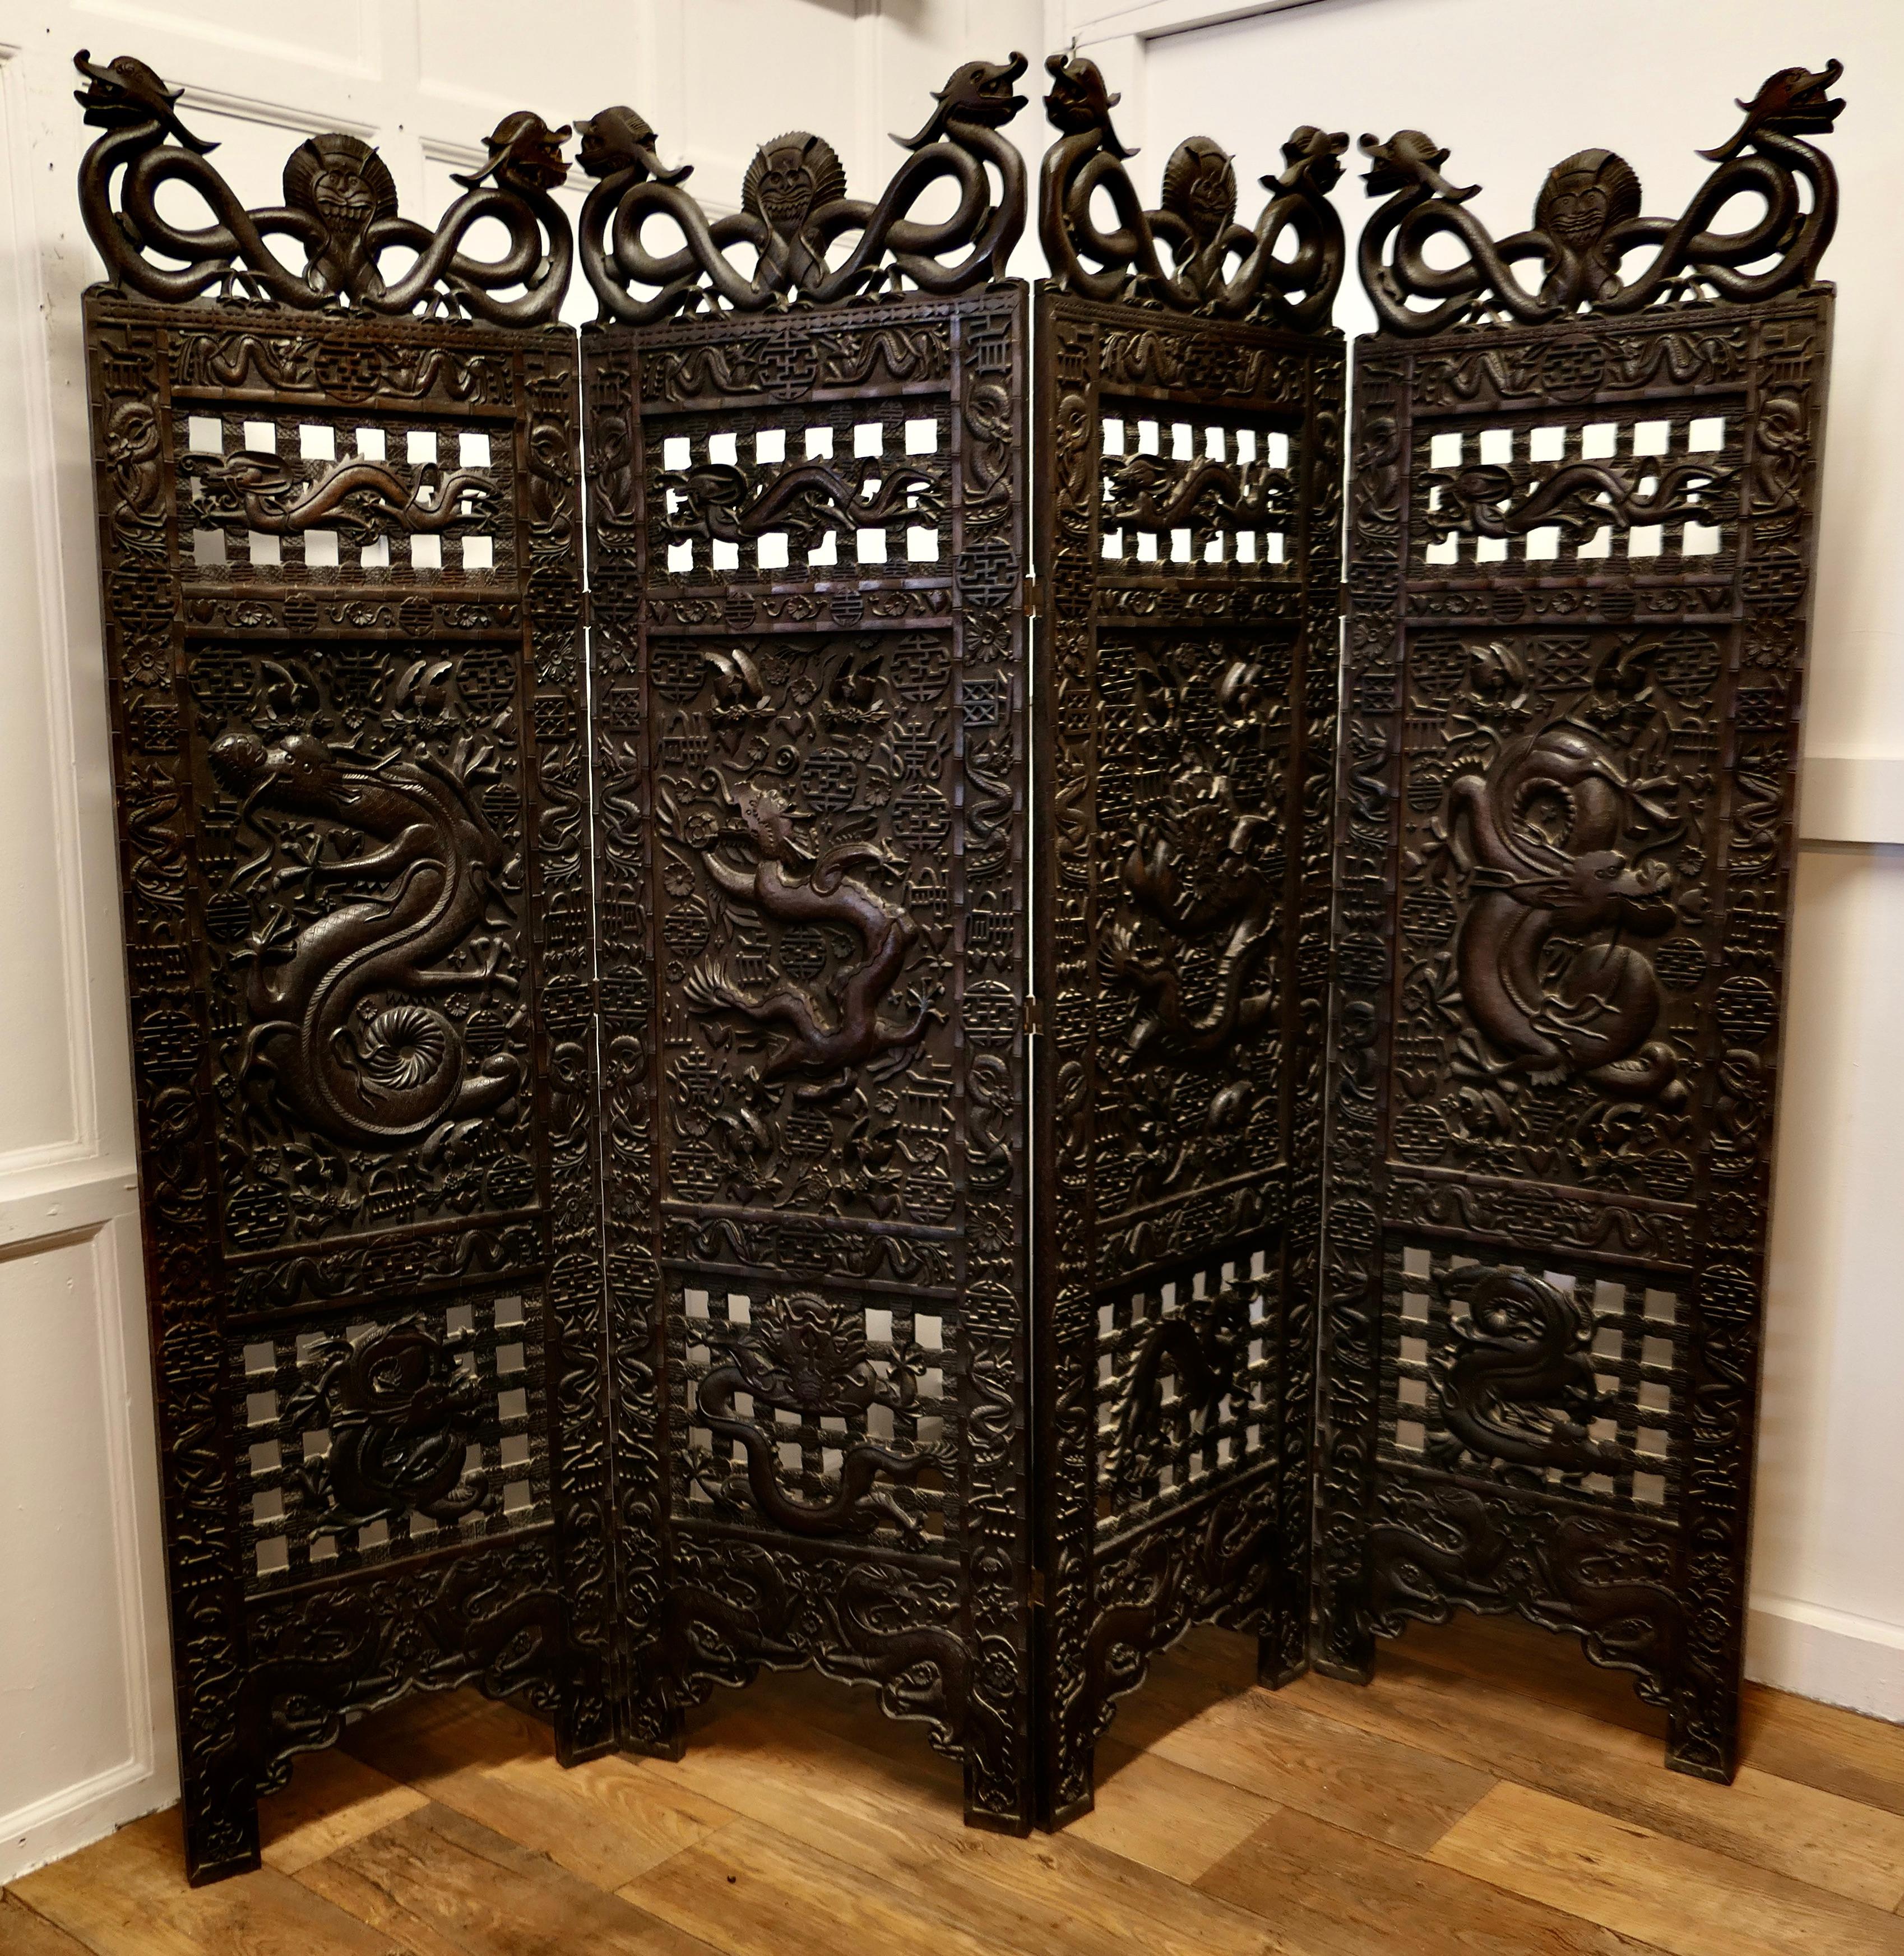 Large Heavy 19th century Carved chinoiserie 4 Fold Screen

This very impressive privacy screen has four large and profusely carved panels, the design is of very many dragons and serpents, each panel has a pair of dragons at the top
The screen is